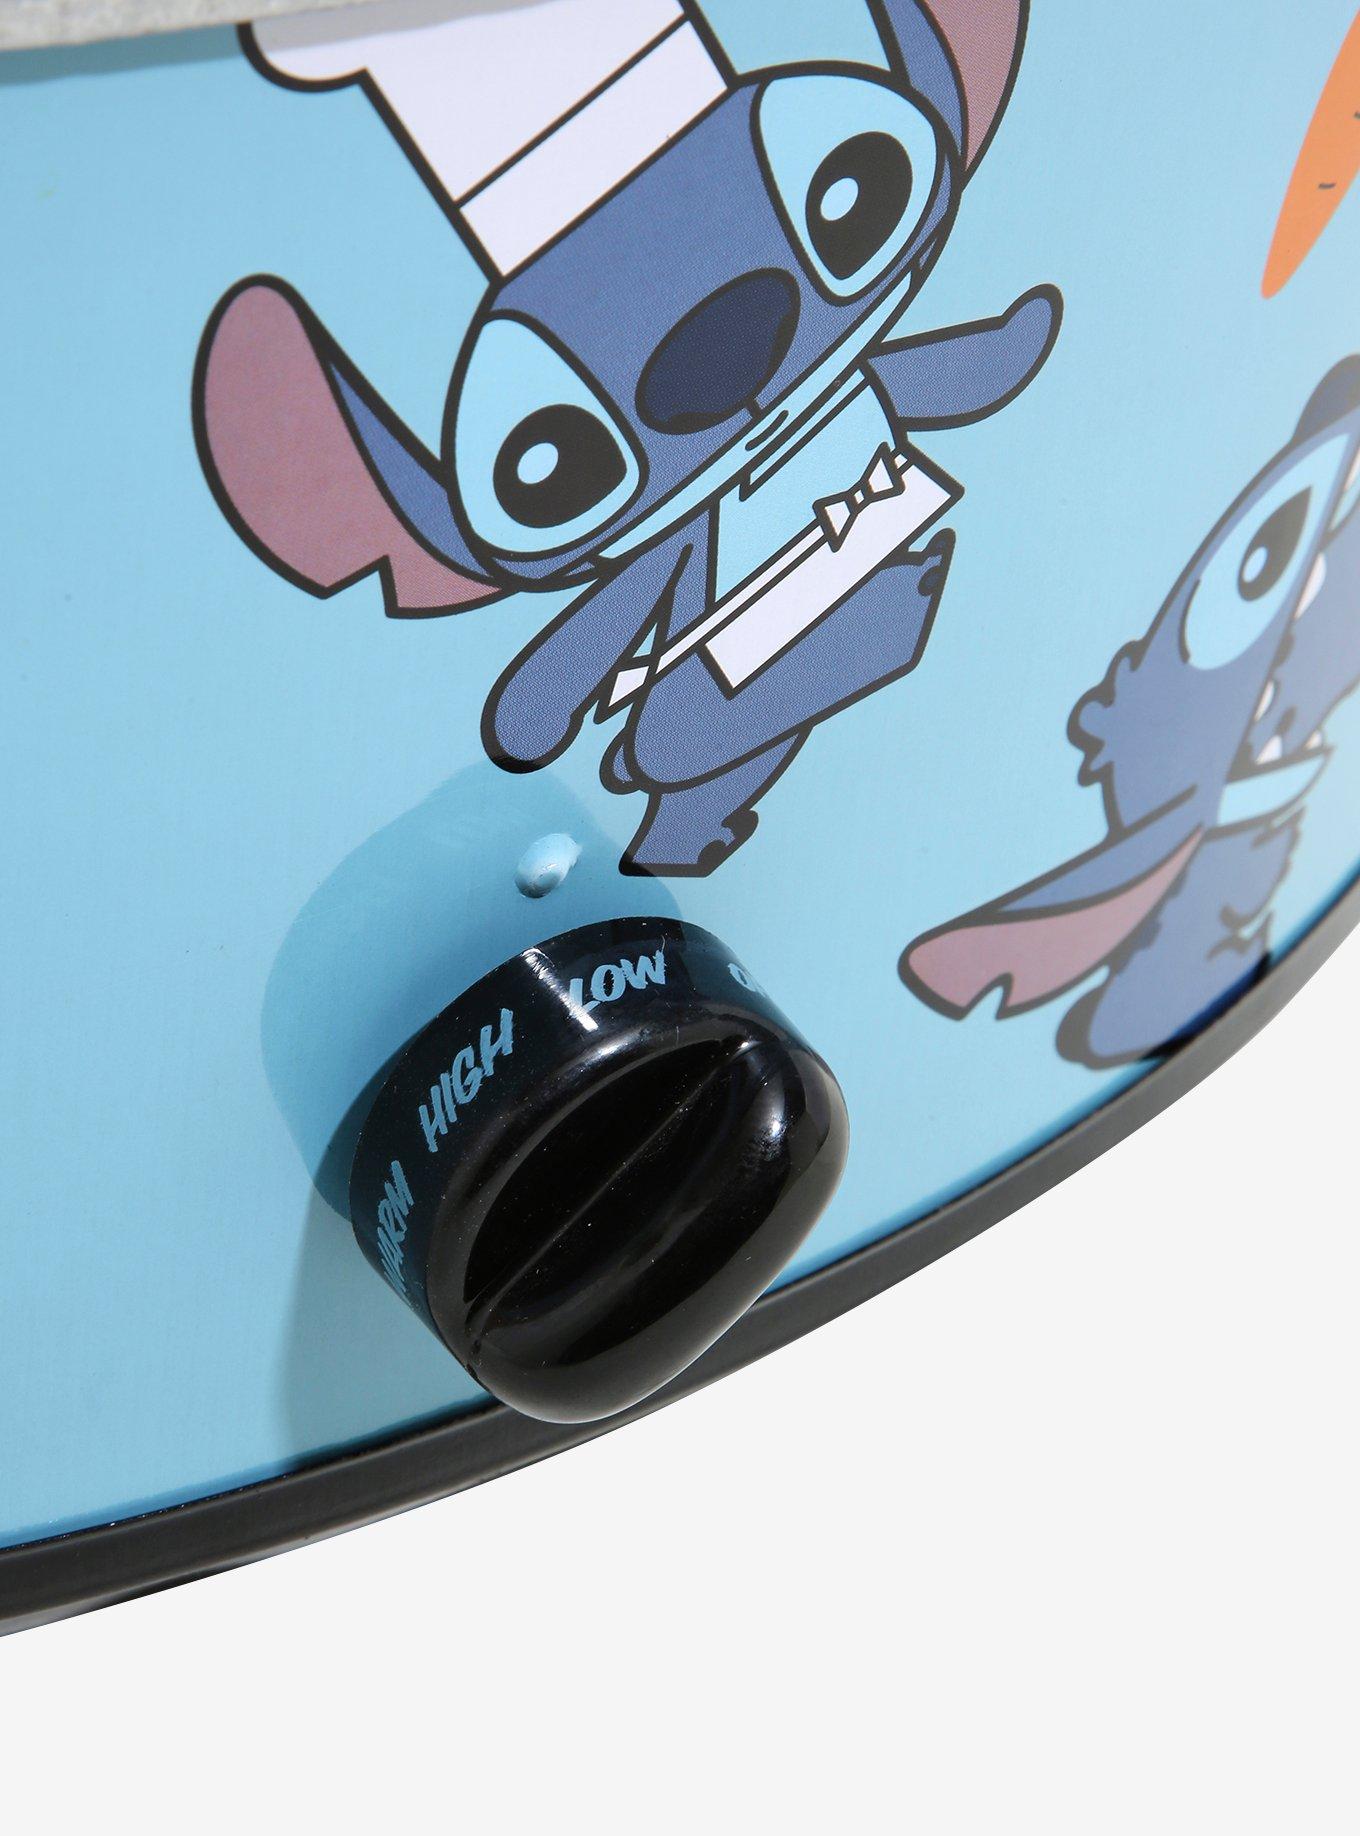 Disney Lilo & Stitch Slow Cooker - BoxLunch Exclusive